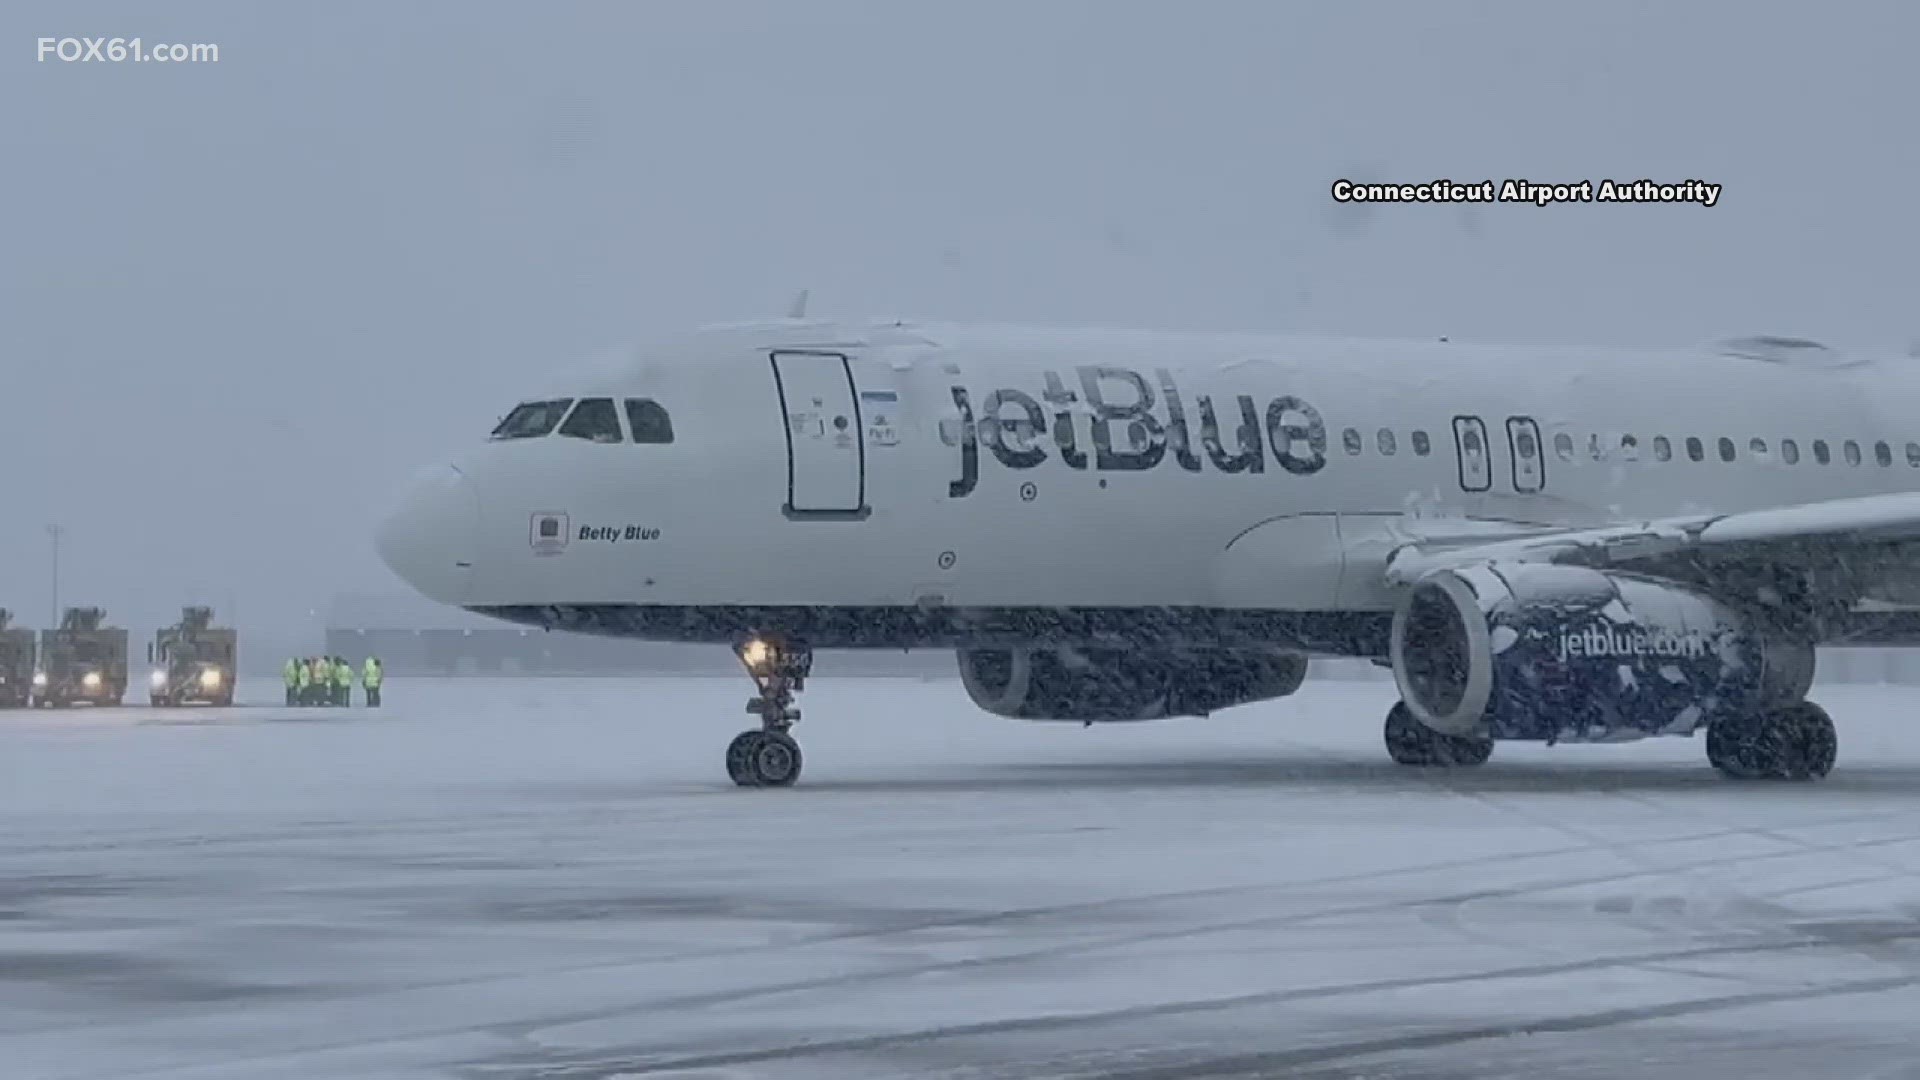 Over 20 flights were canceled at Tweet Airport on Tuesday ahead of the snow storm.